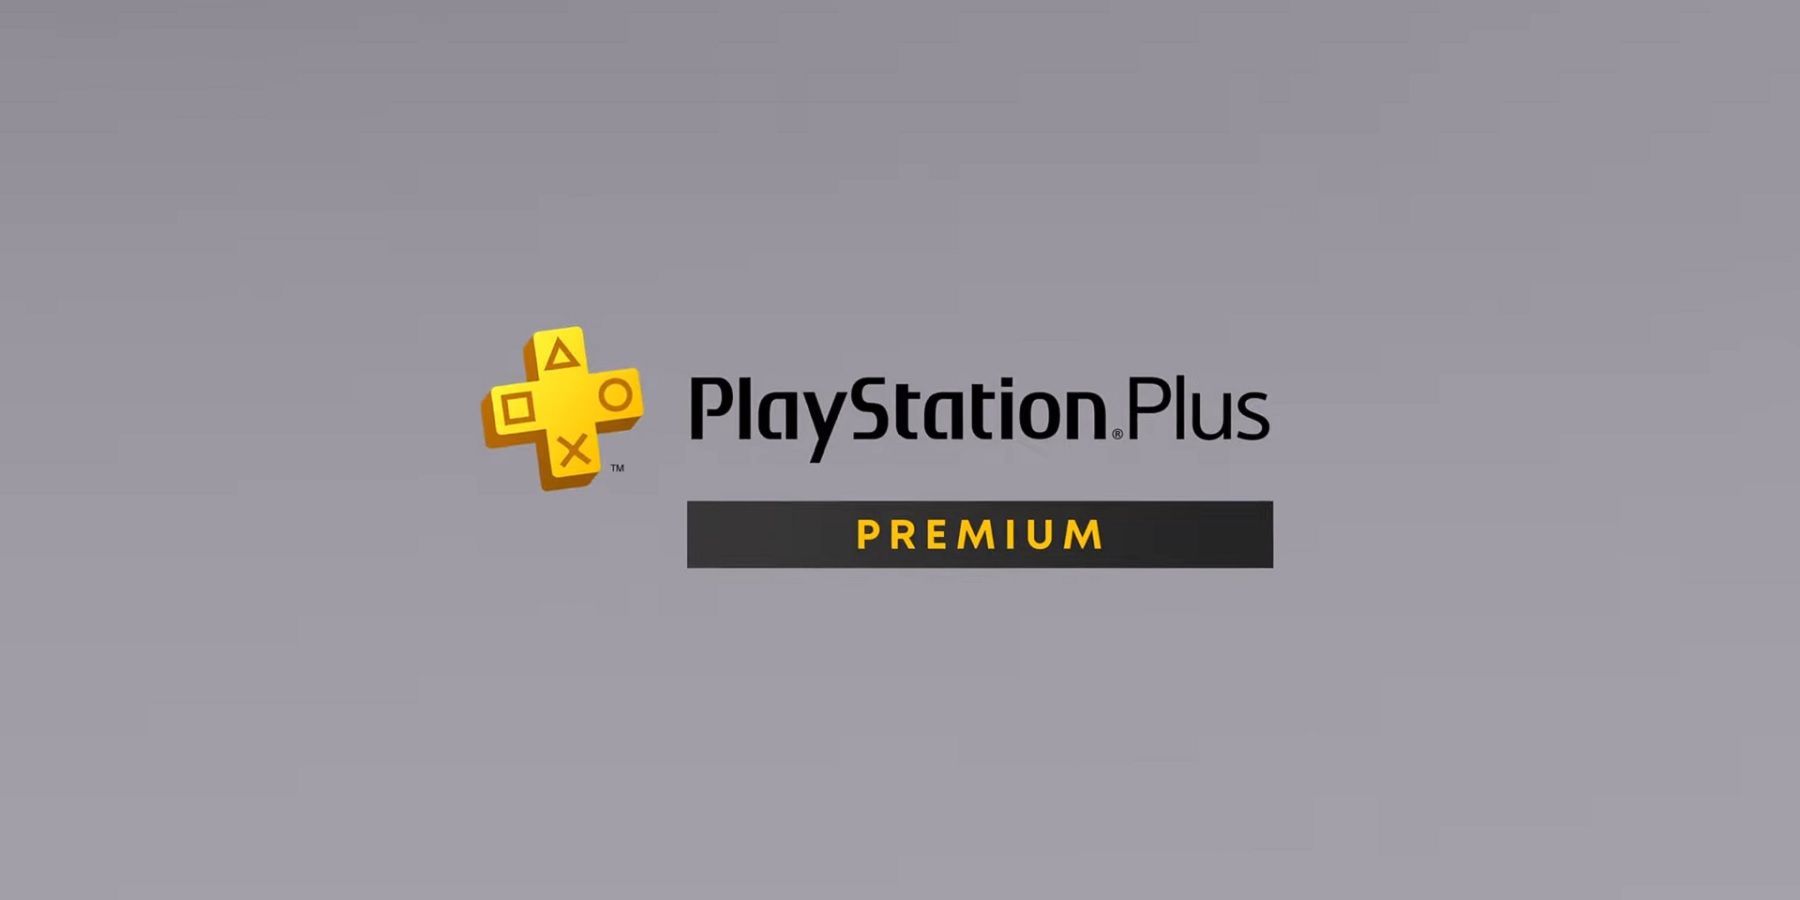 playstation plus premium game trials list and duration